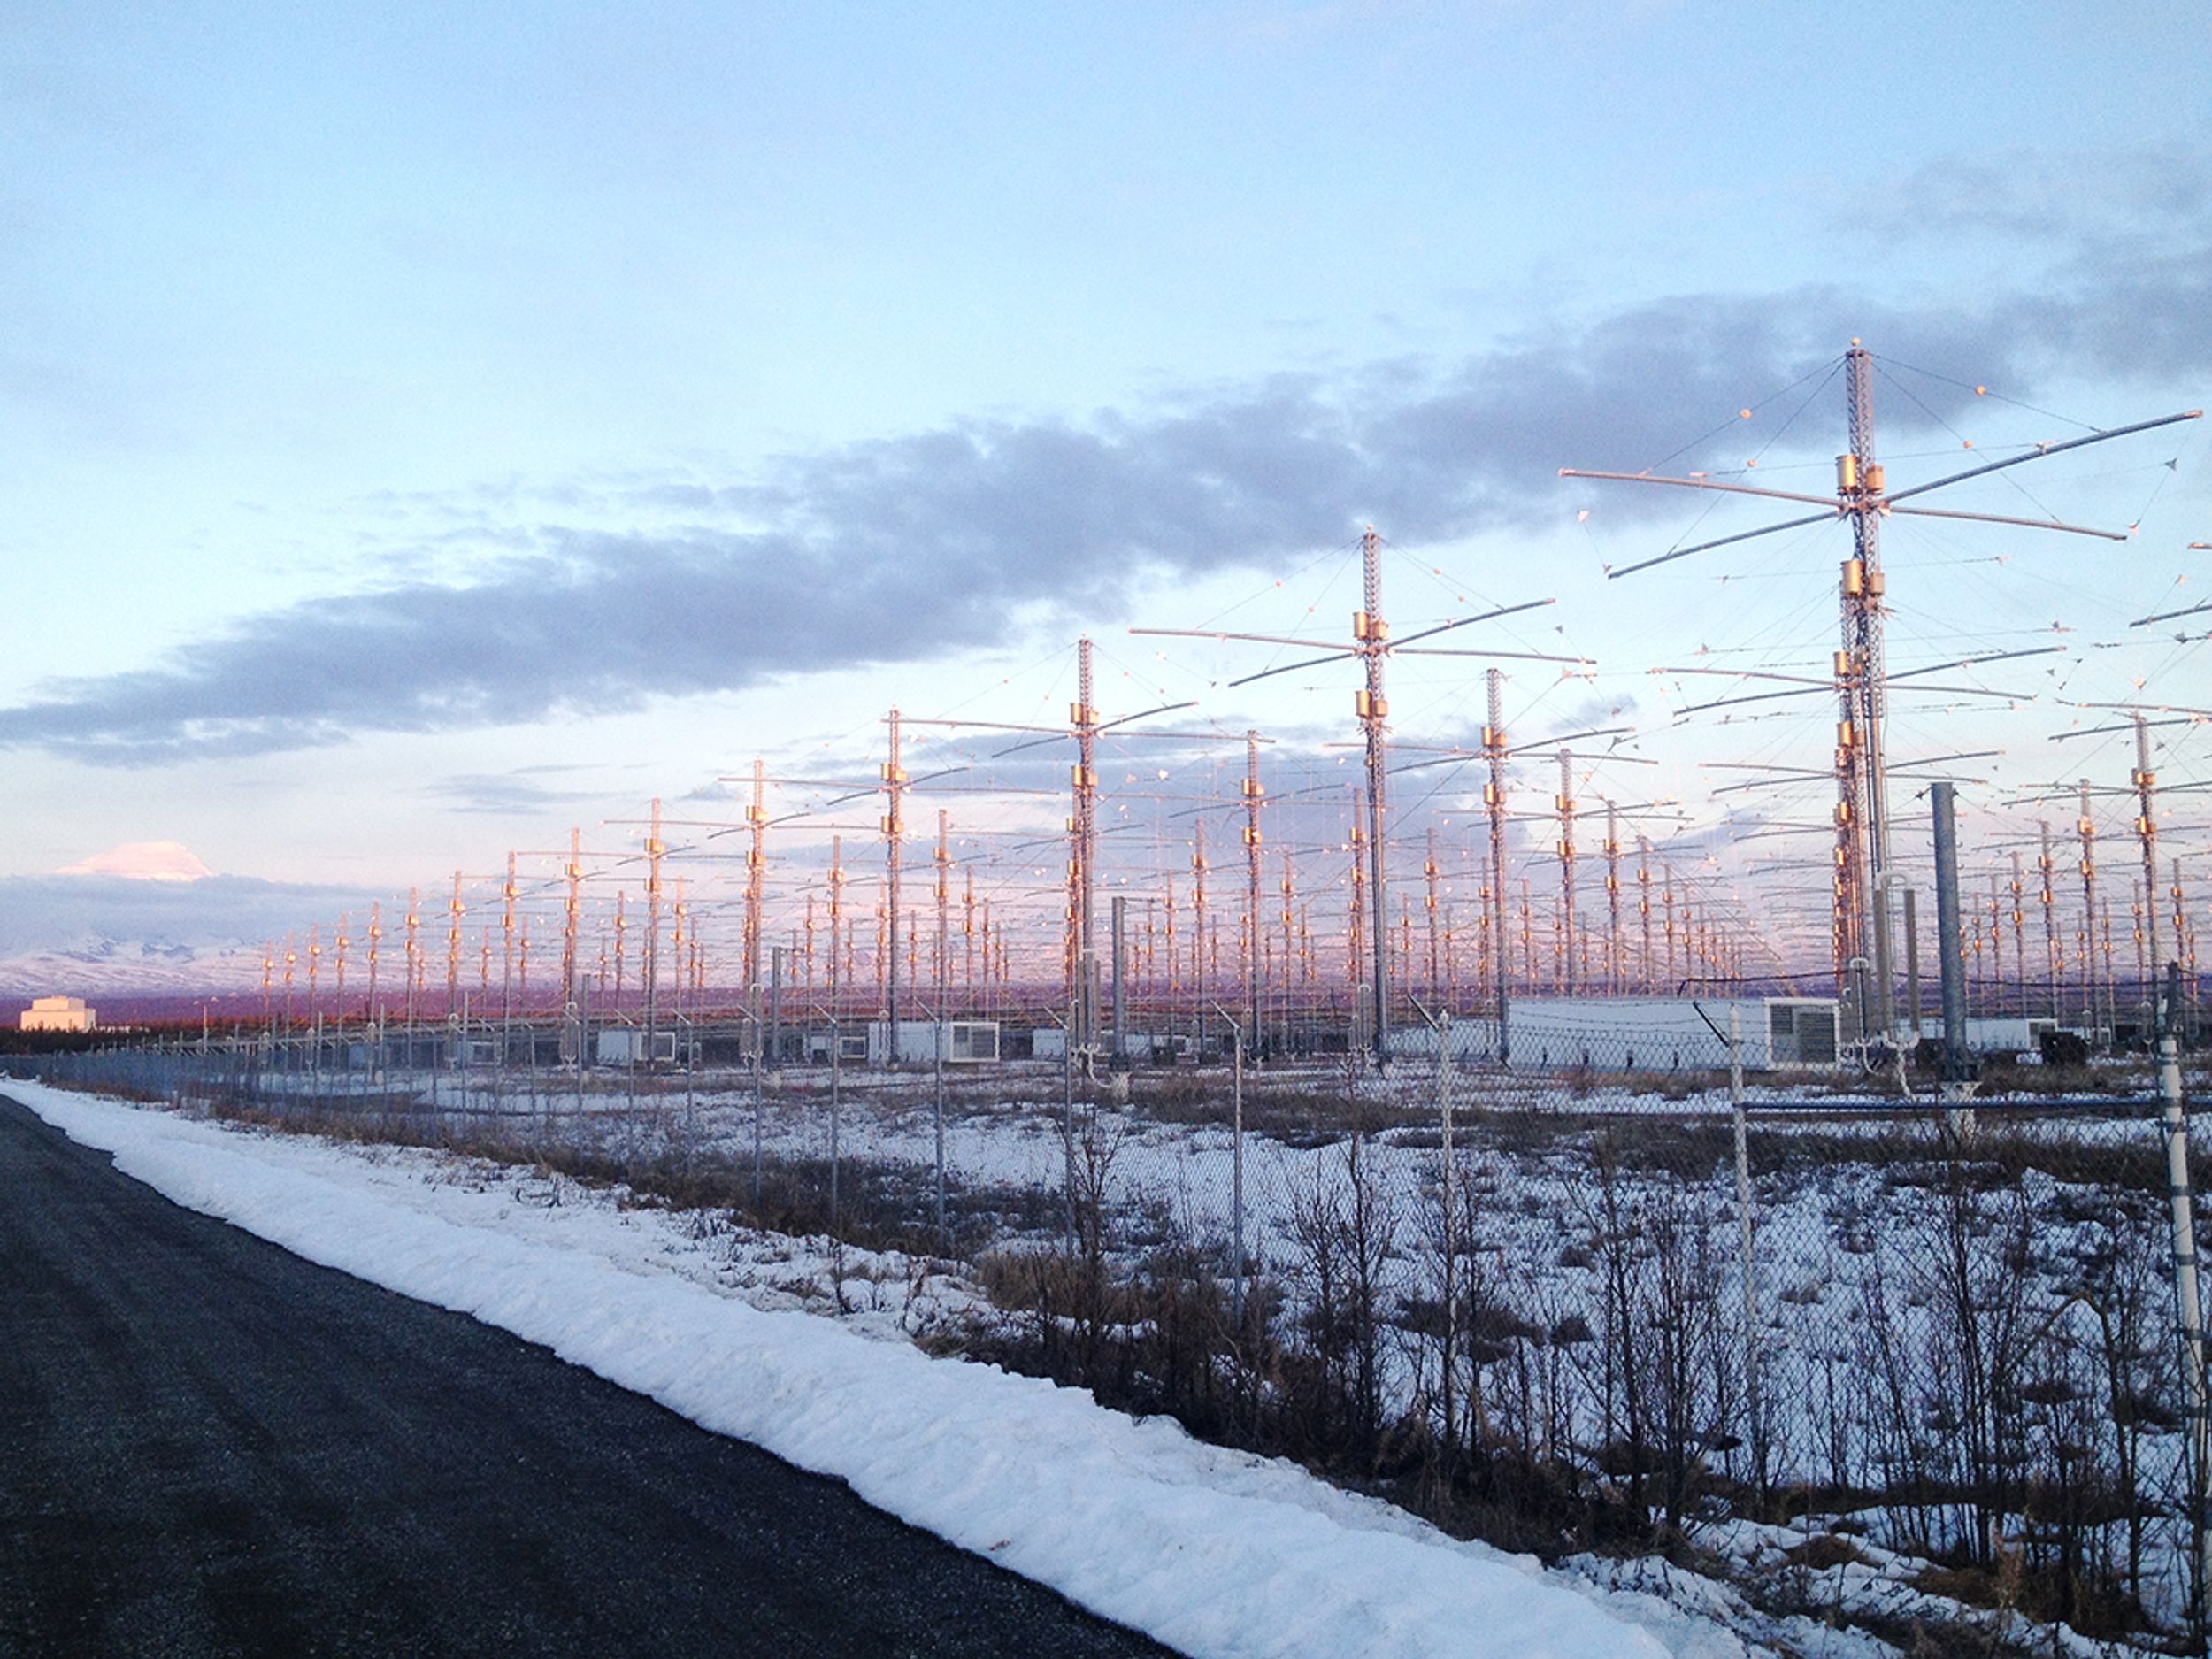 A photo of the HARRP antenna array lit up before a snowy lanscape at sunset.